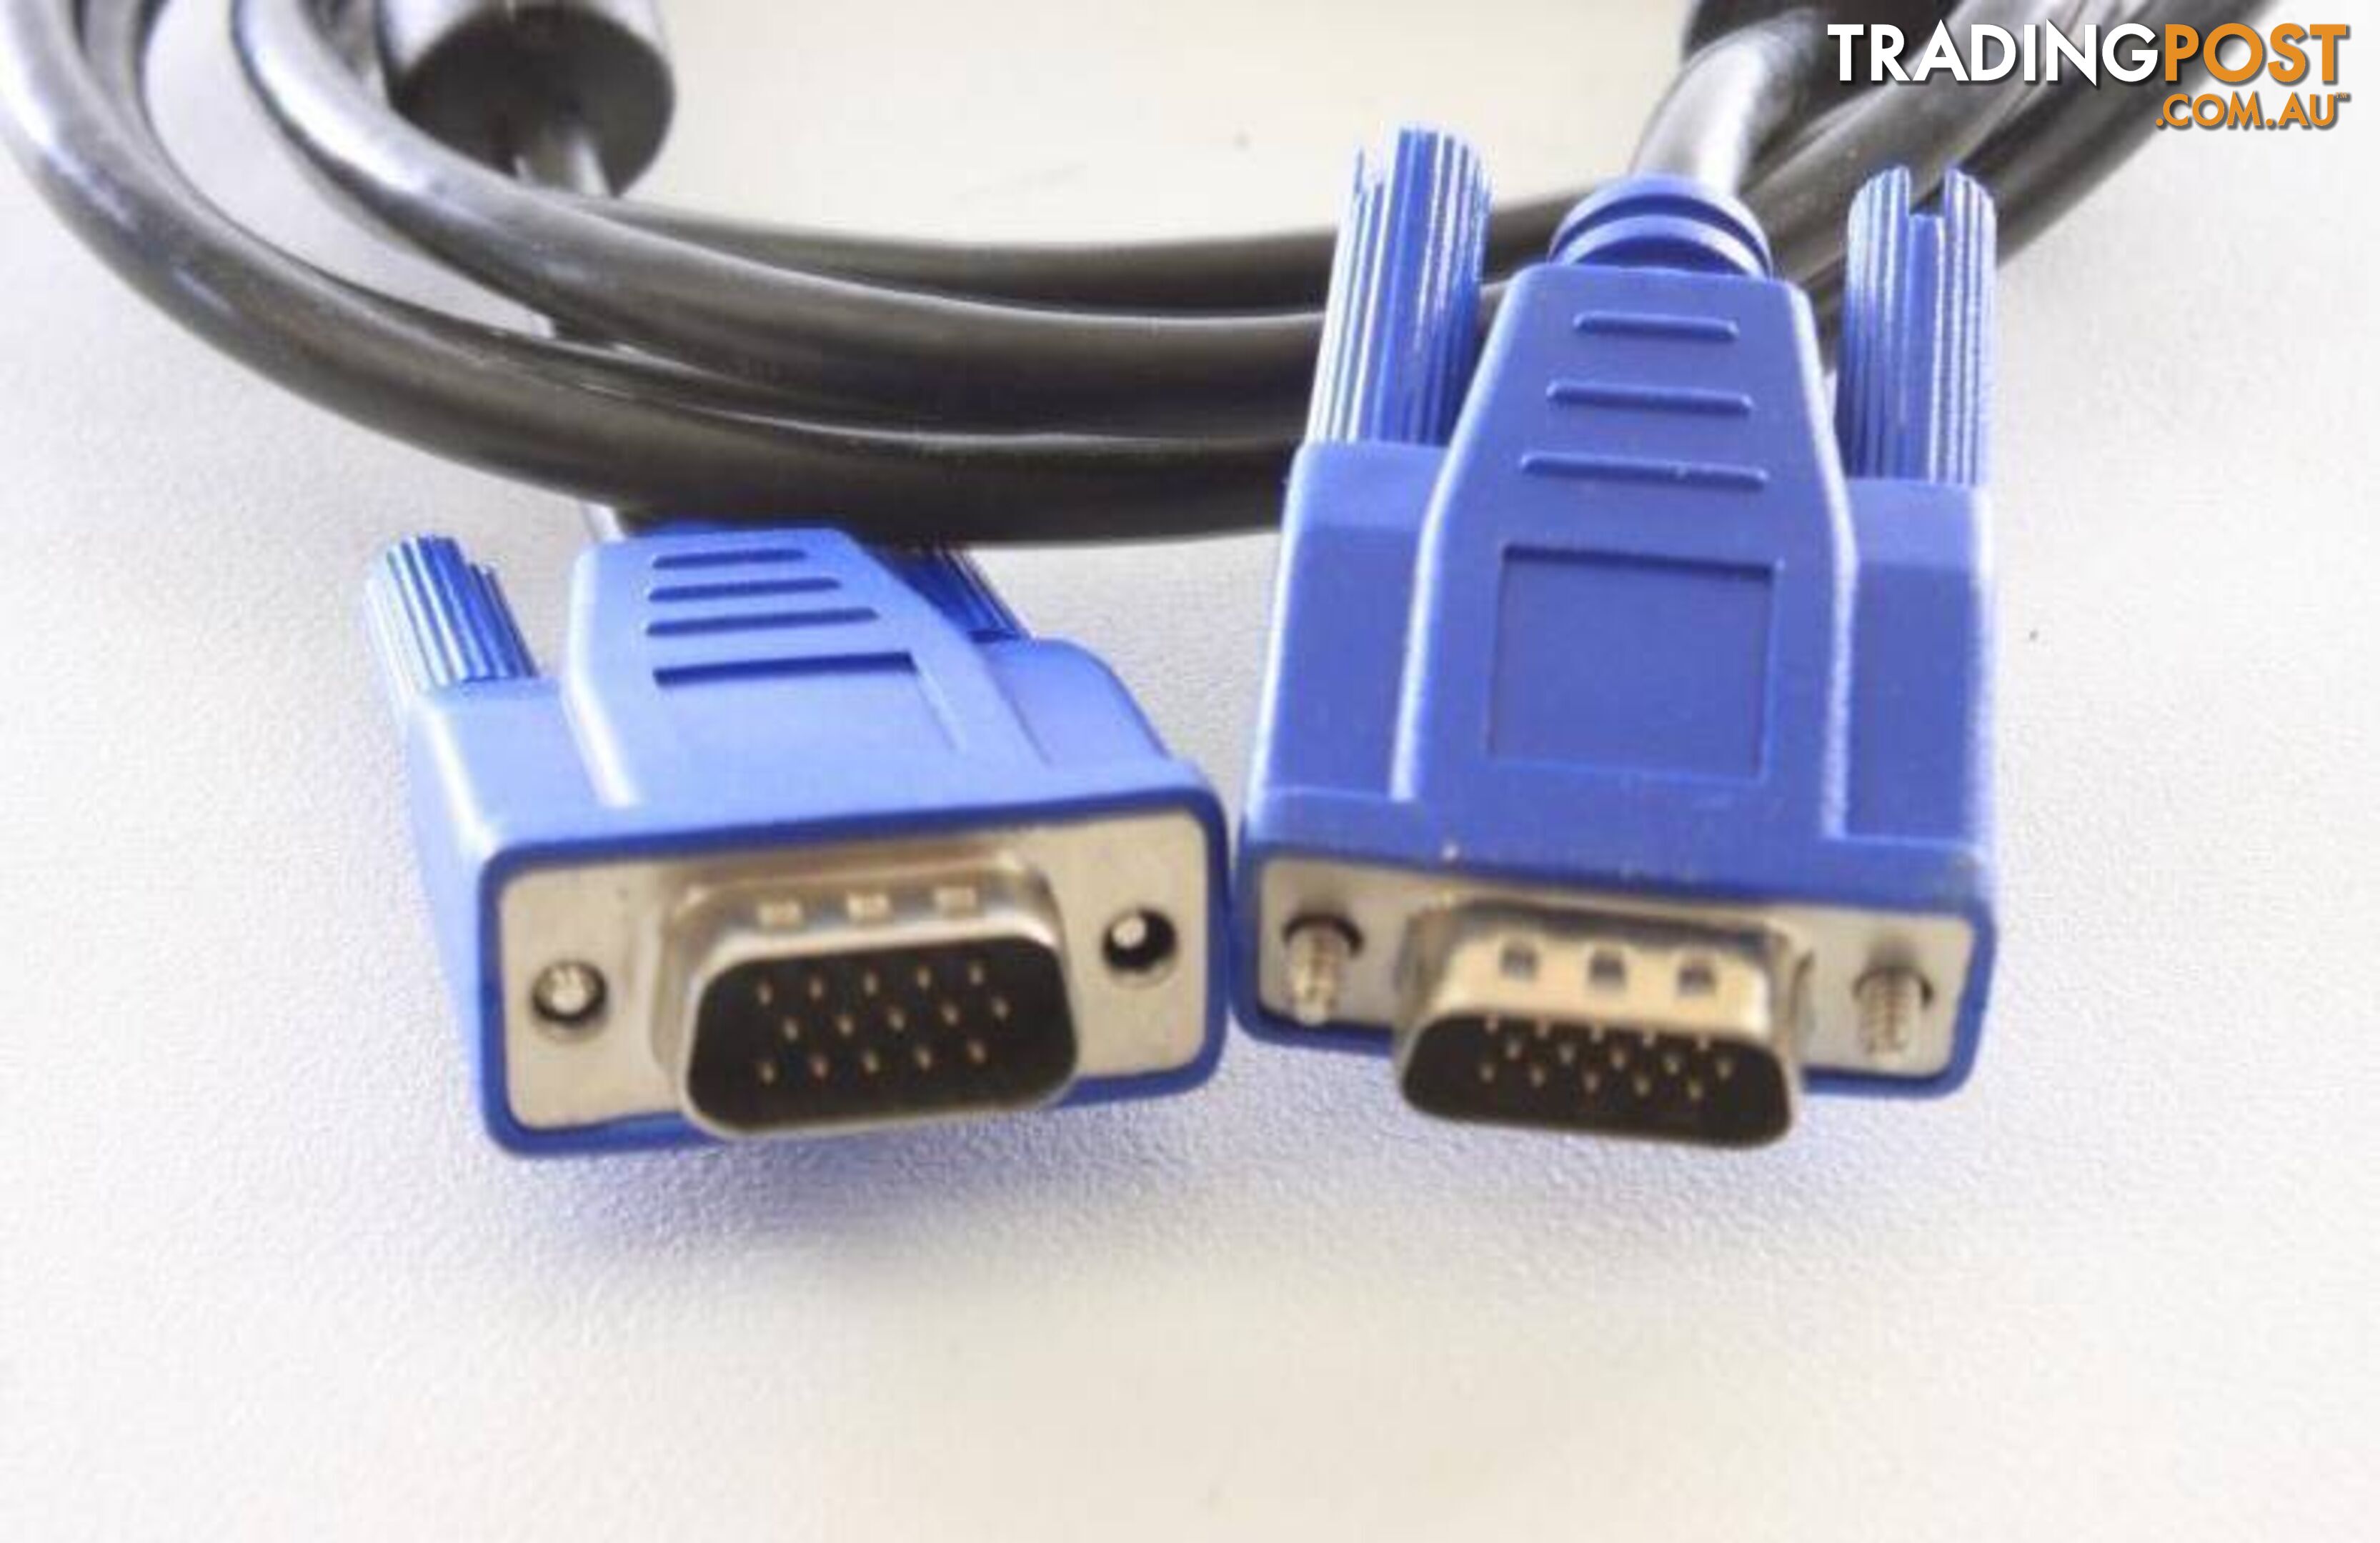 HP ROLLER MICE & CABLES etc. From: $5